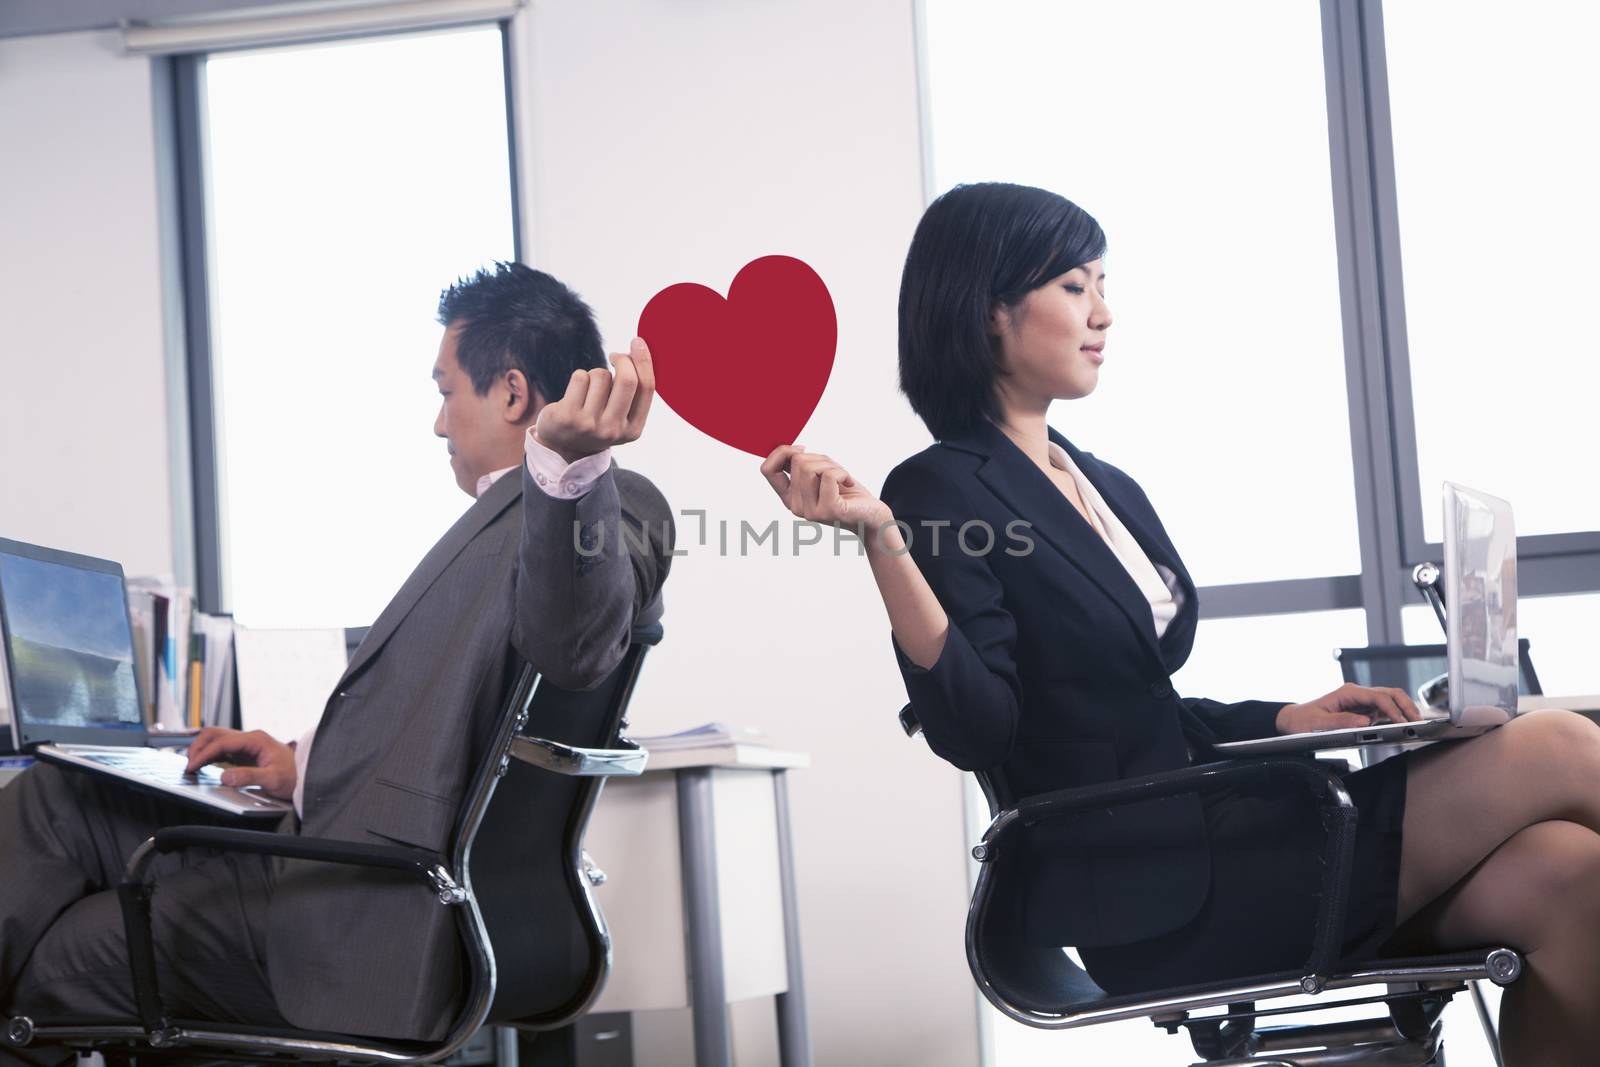 Work romance between two business people holding a heart